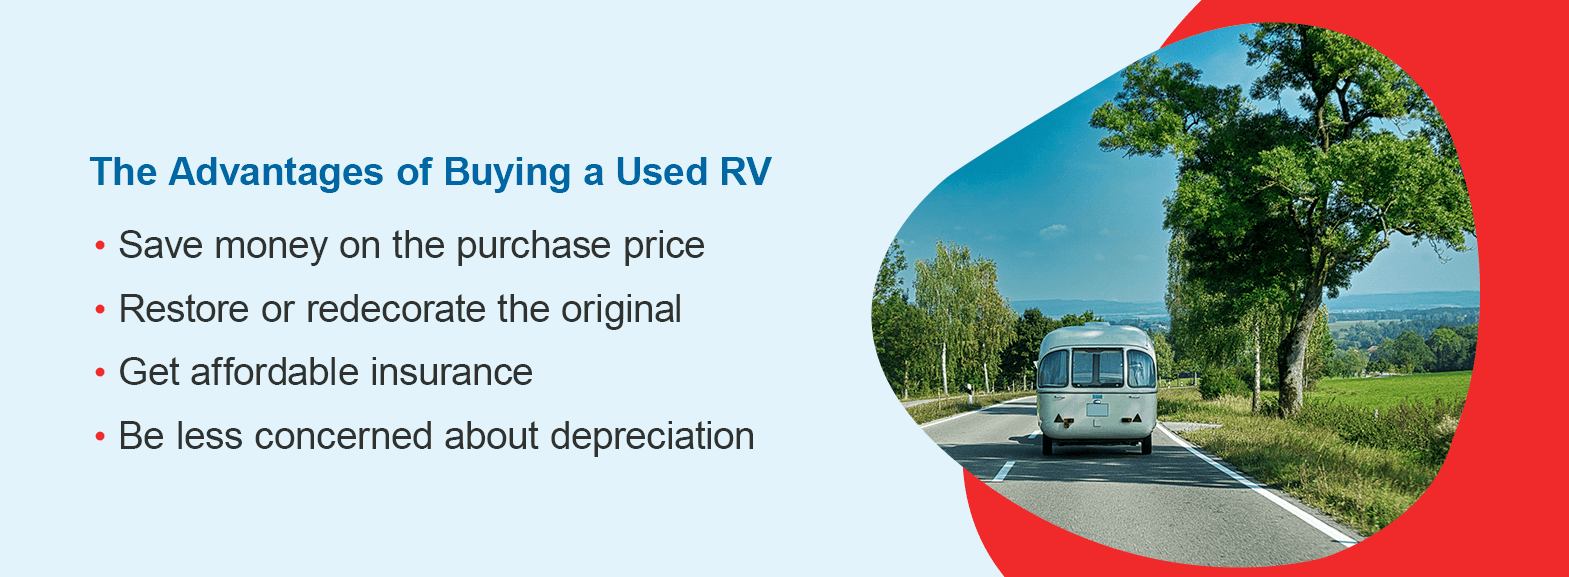 The Advantages of Buying a Used RV